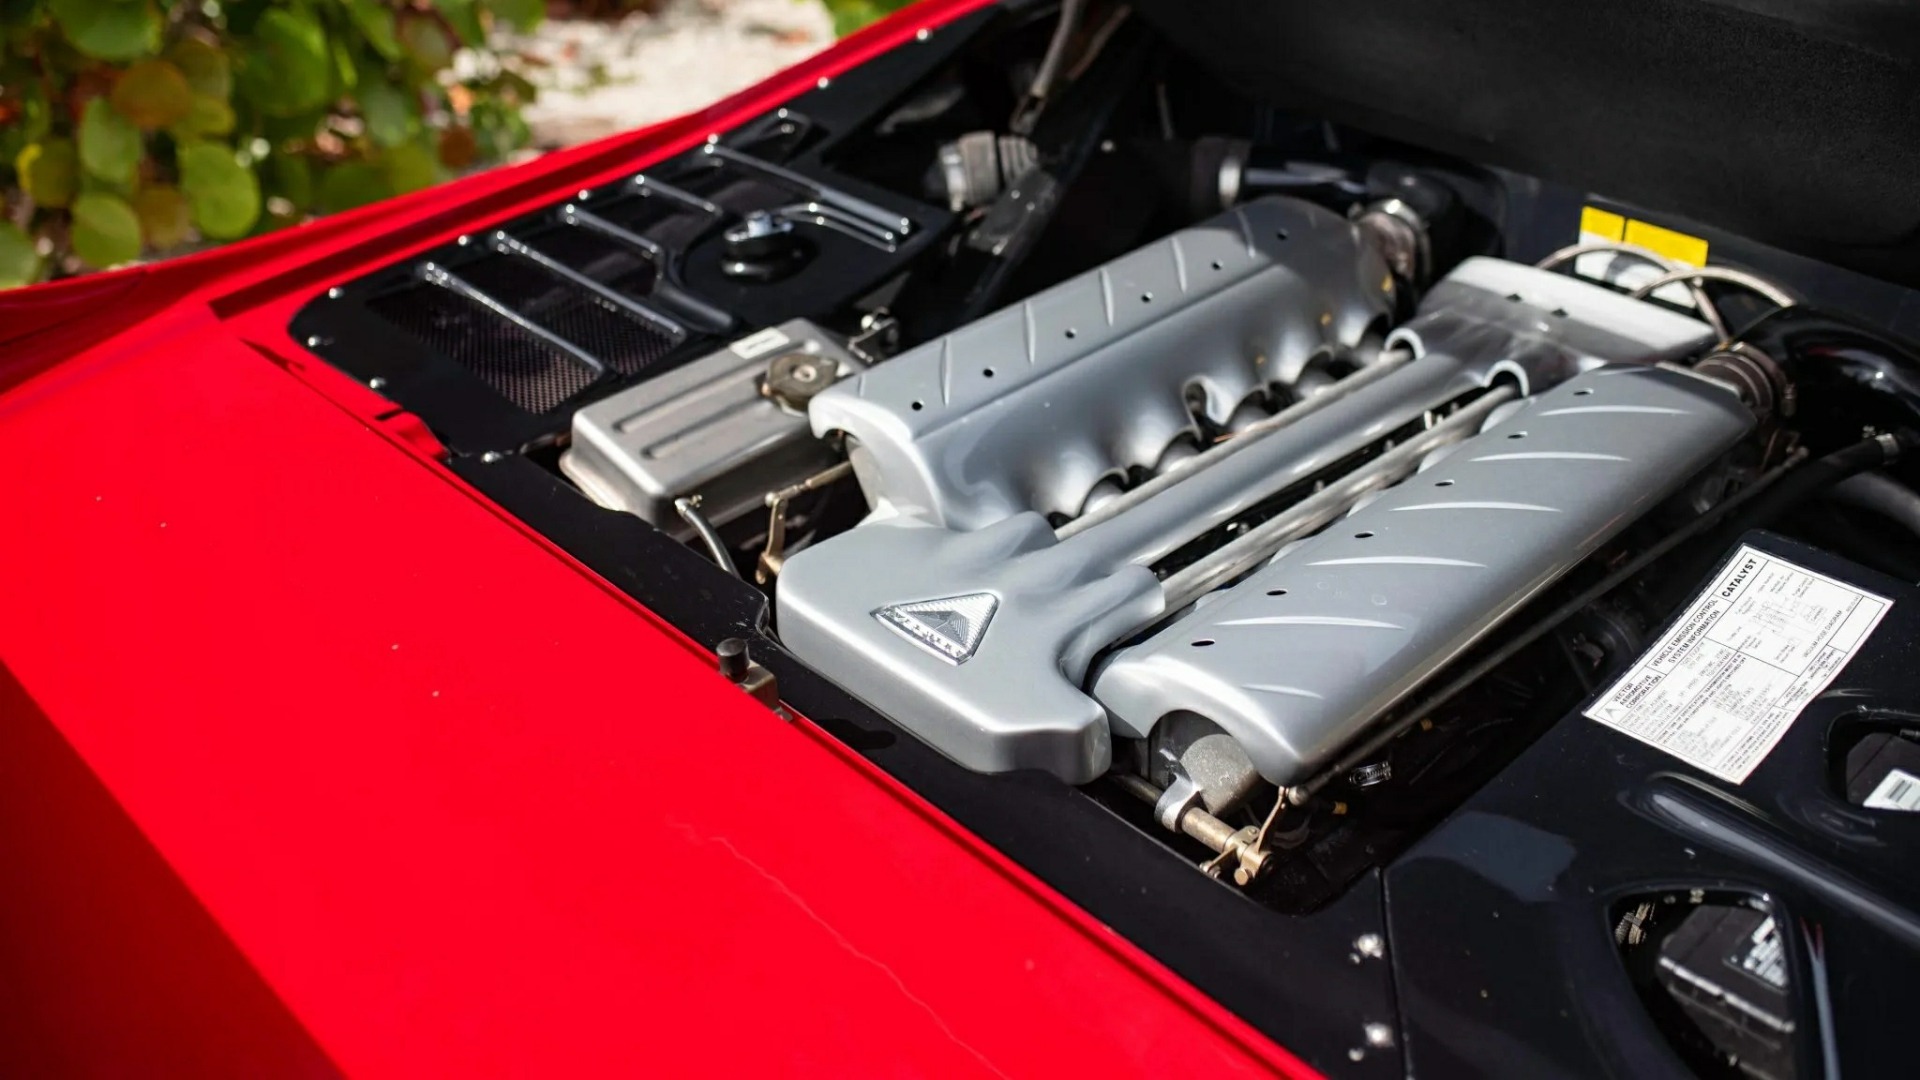 1996 Vector M12's Engine Bay Holding A The 5.7-liter Lamborghini V12 Engine (Credits Bring A Trailer)